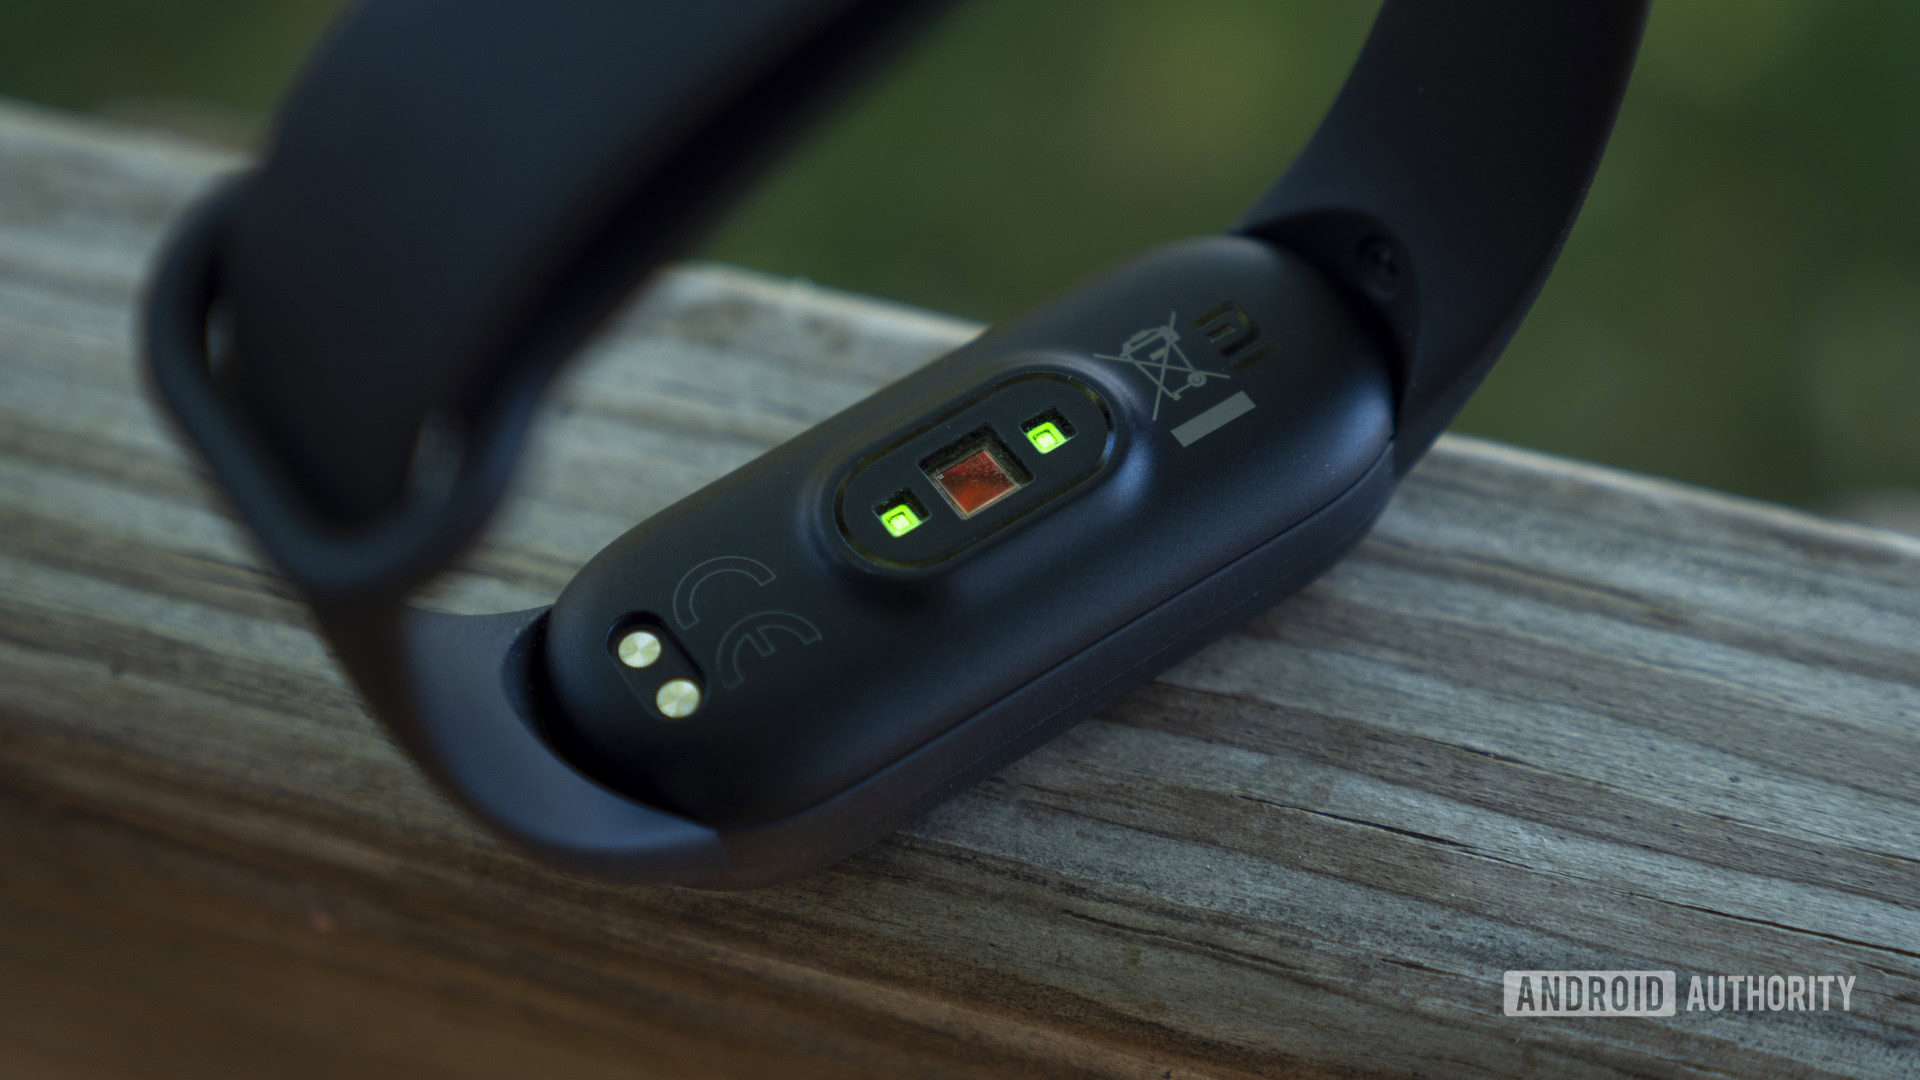 Xiaomi Mi Band buyer's guide: Everything you need to know